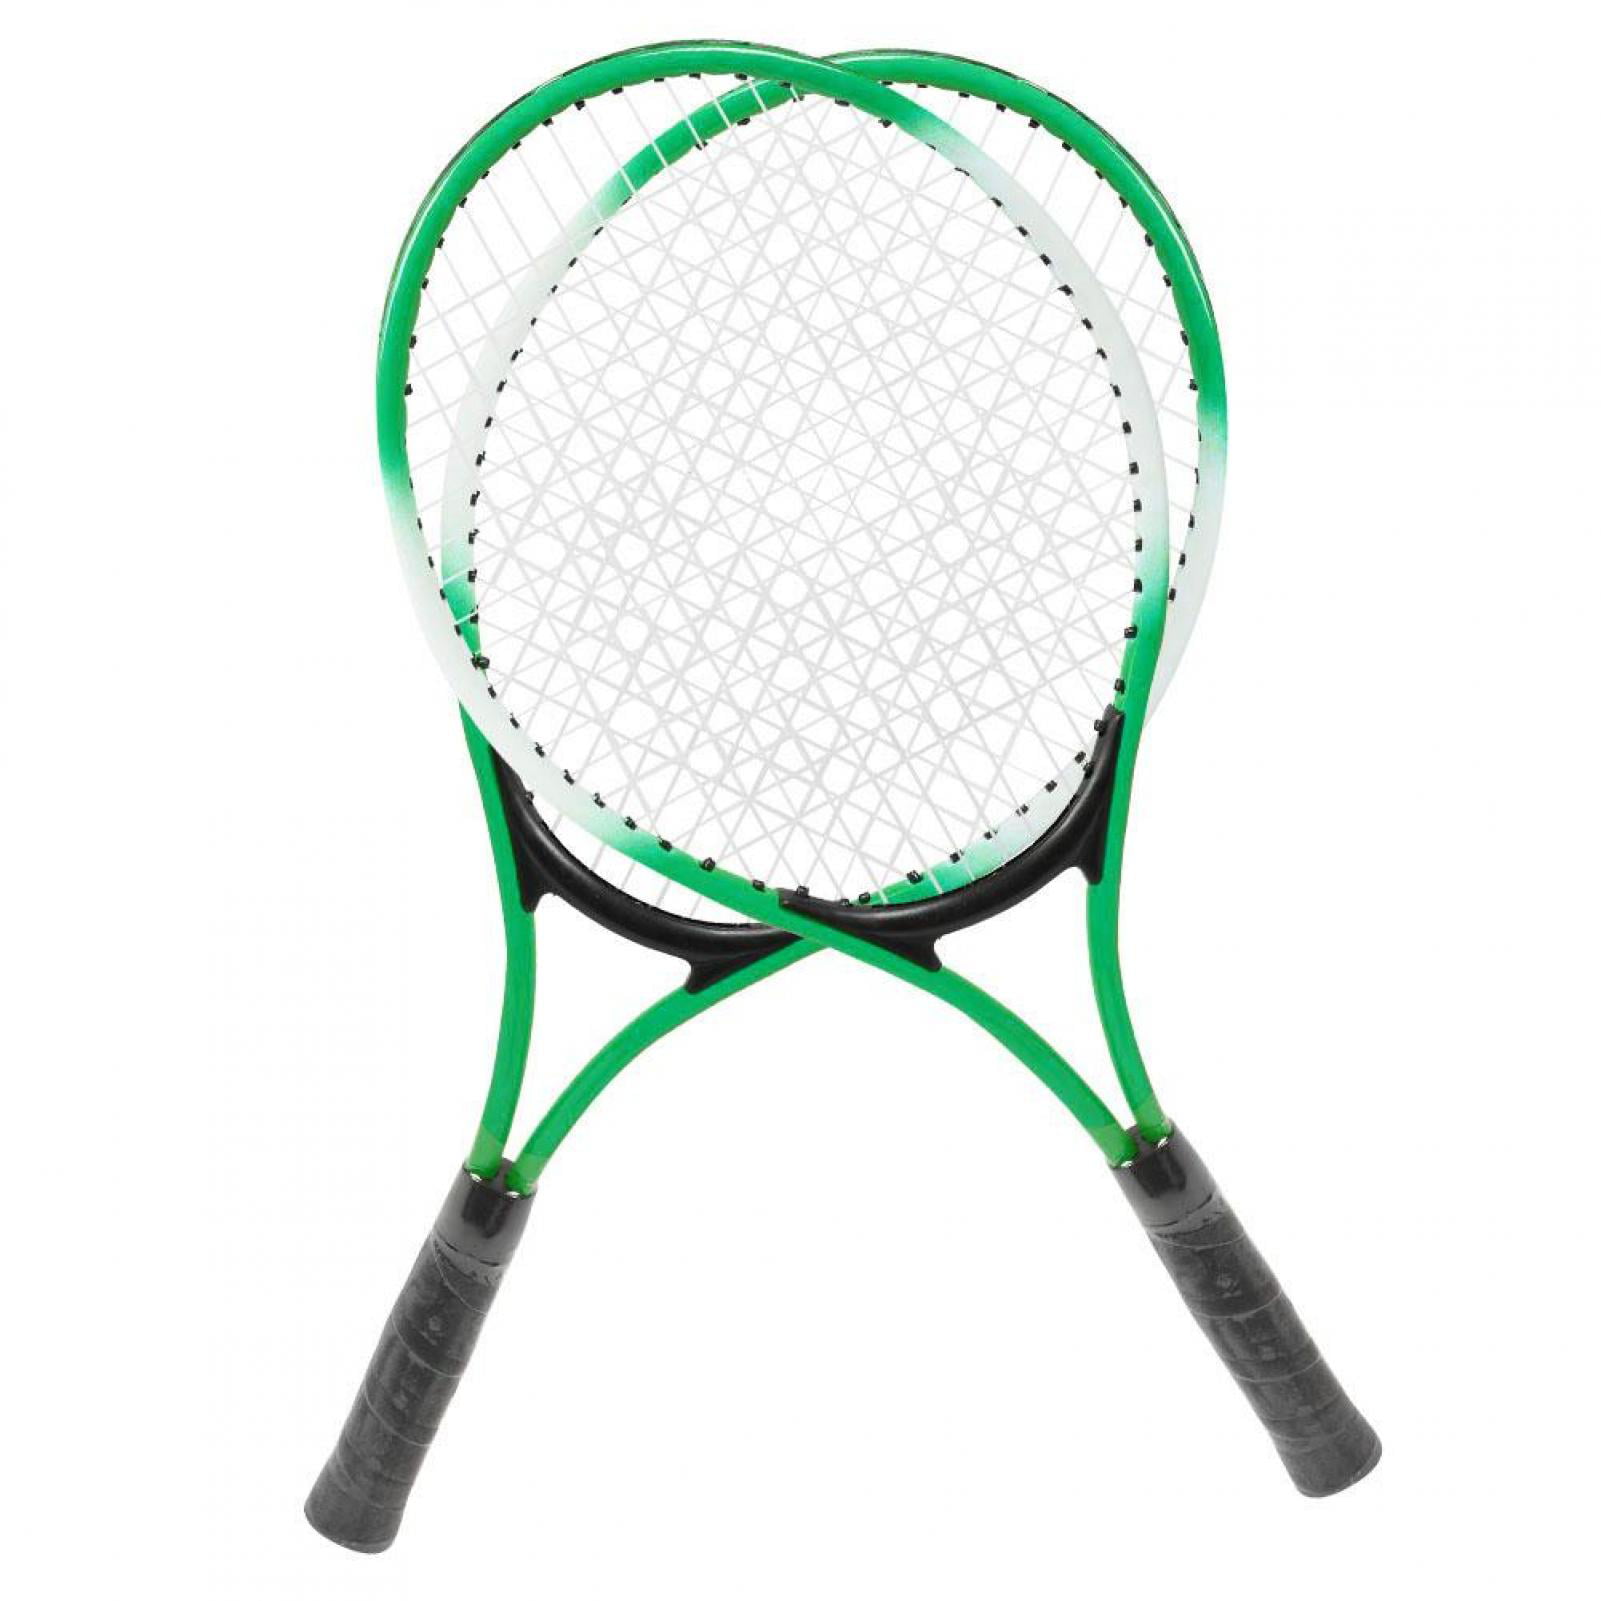 Iron Alloy Children Tennis Racket Beginner Practice Racquet with Ball and Carry Bag for Green 